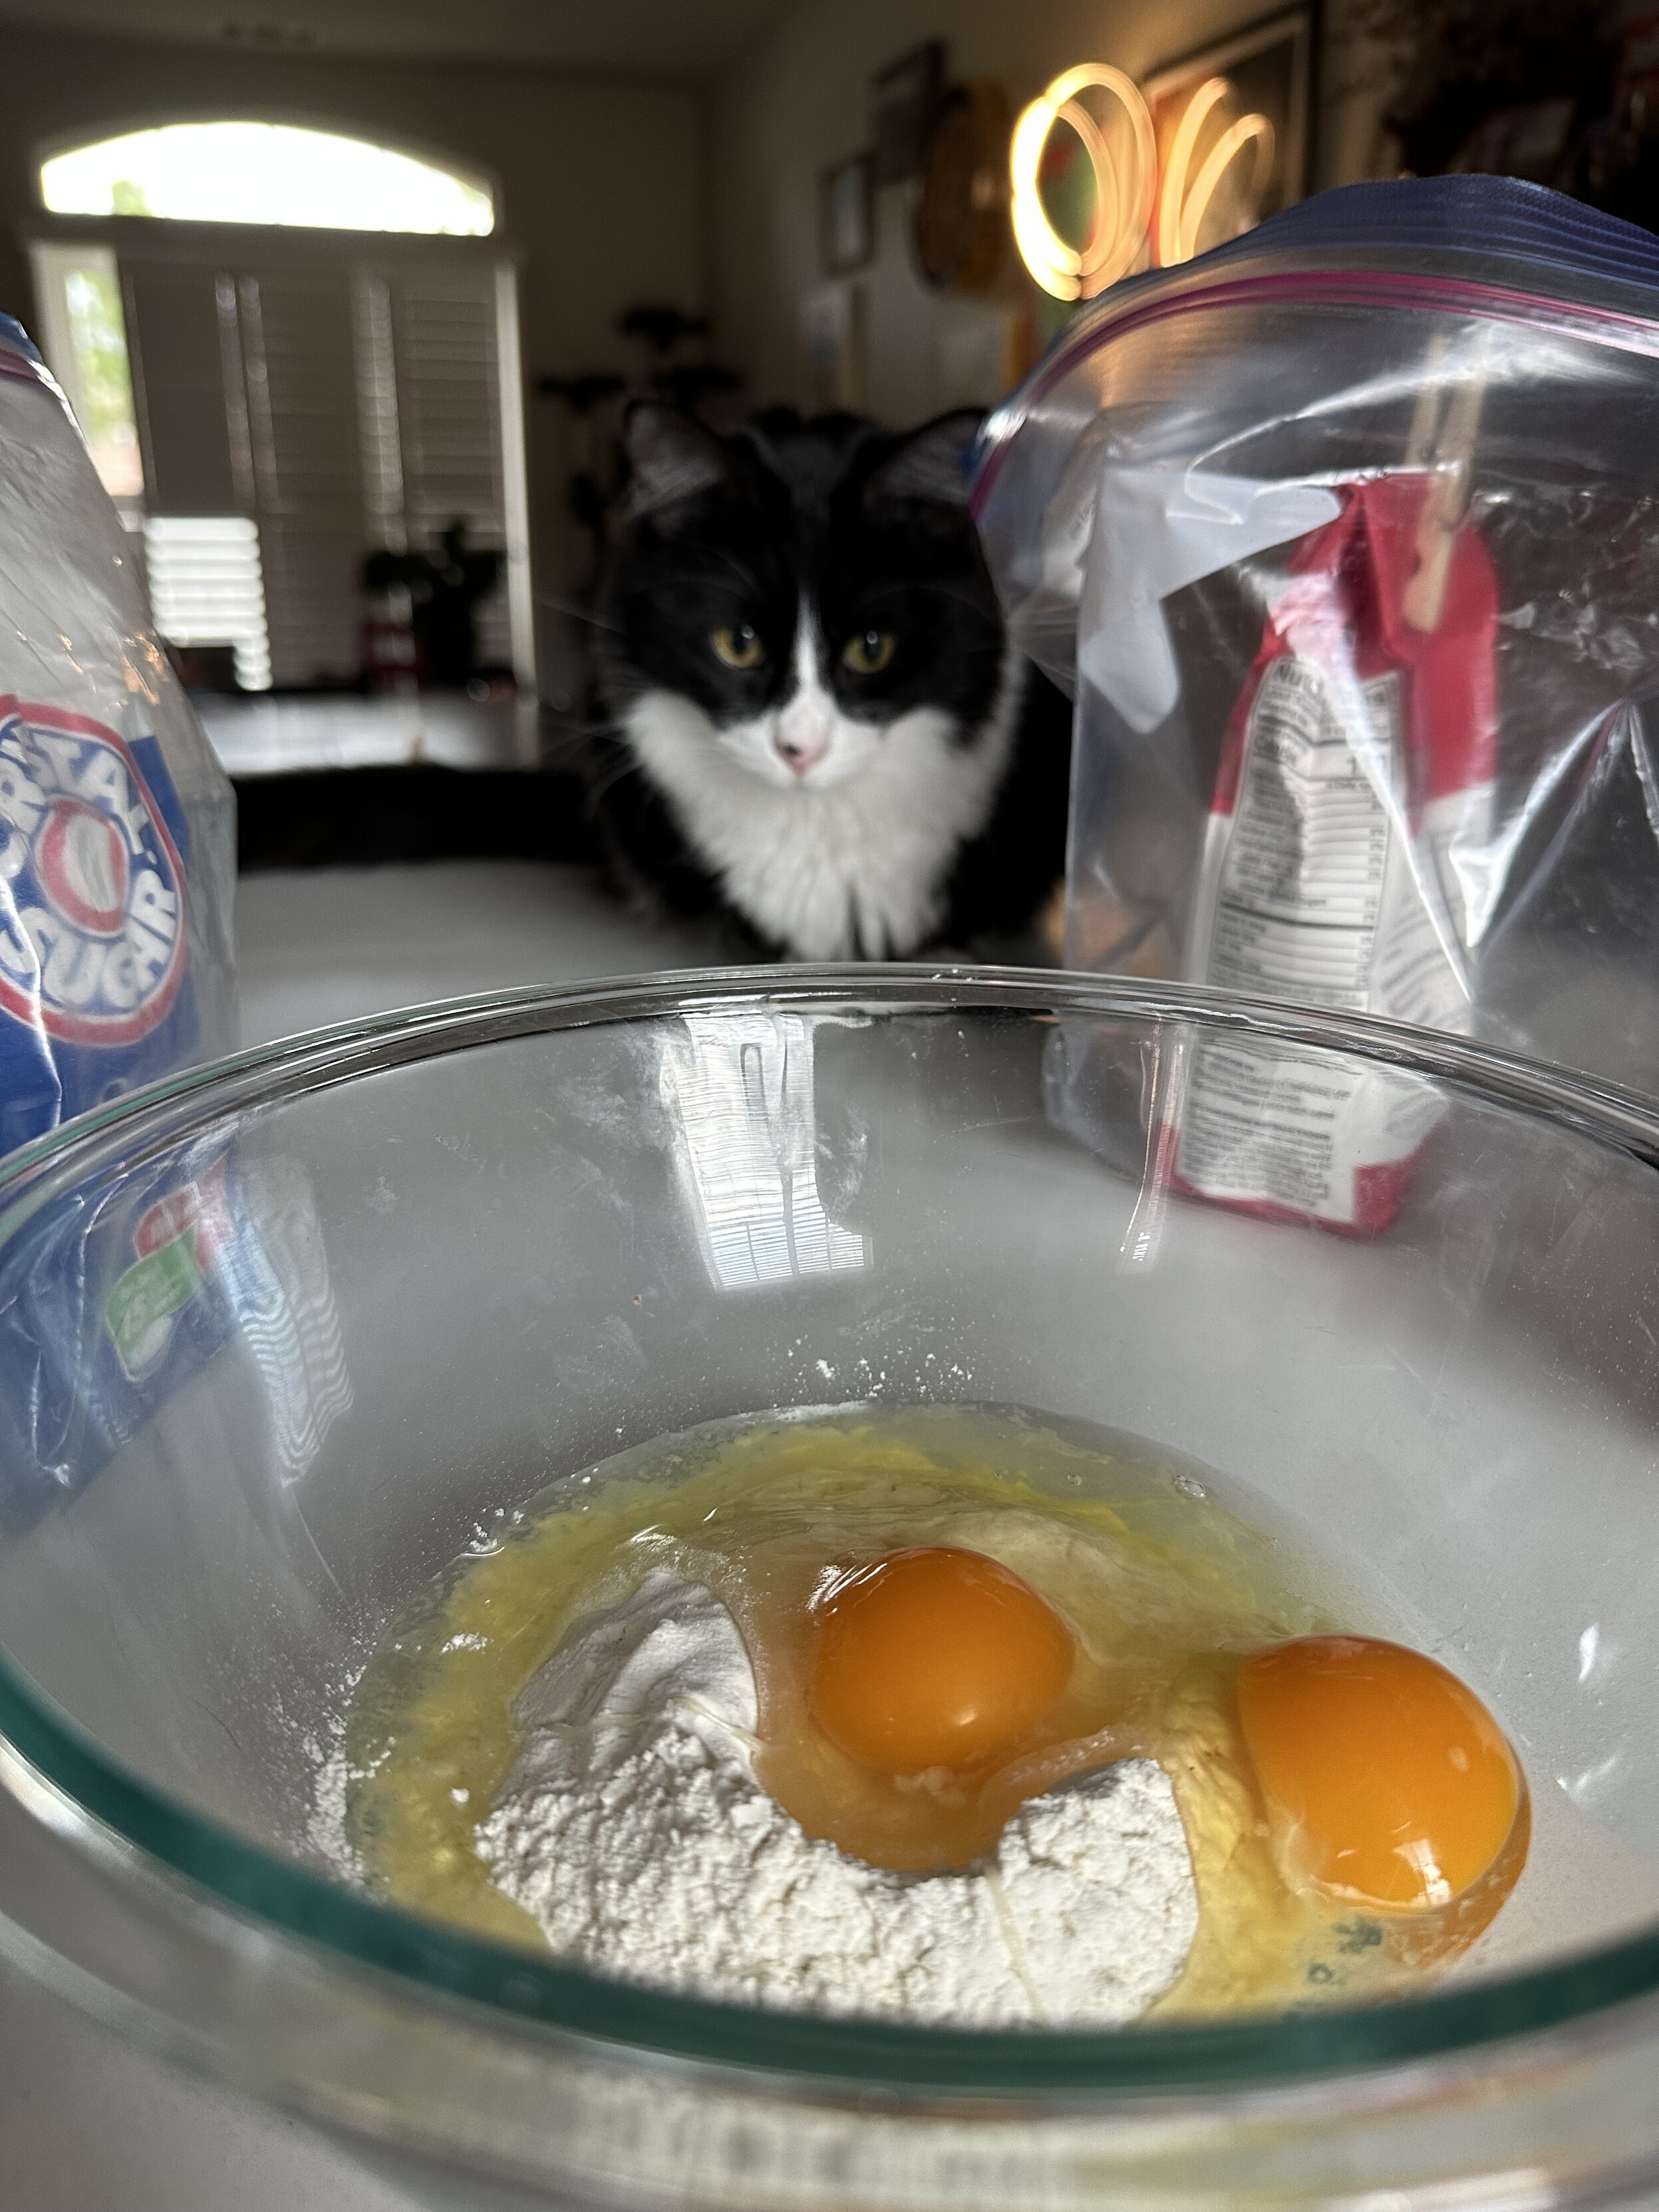 My cat on a counter creeping up on my crepe batter.